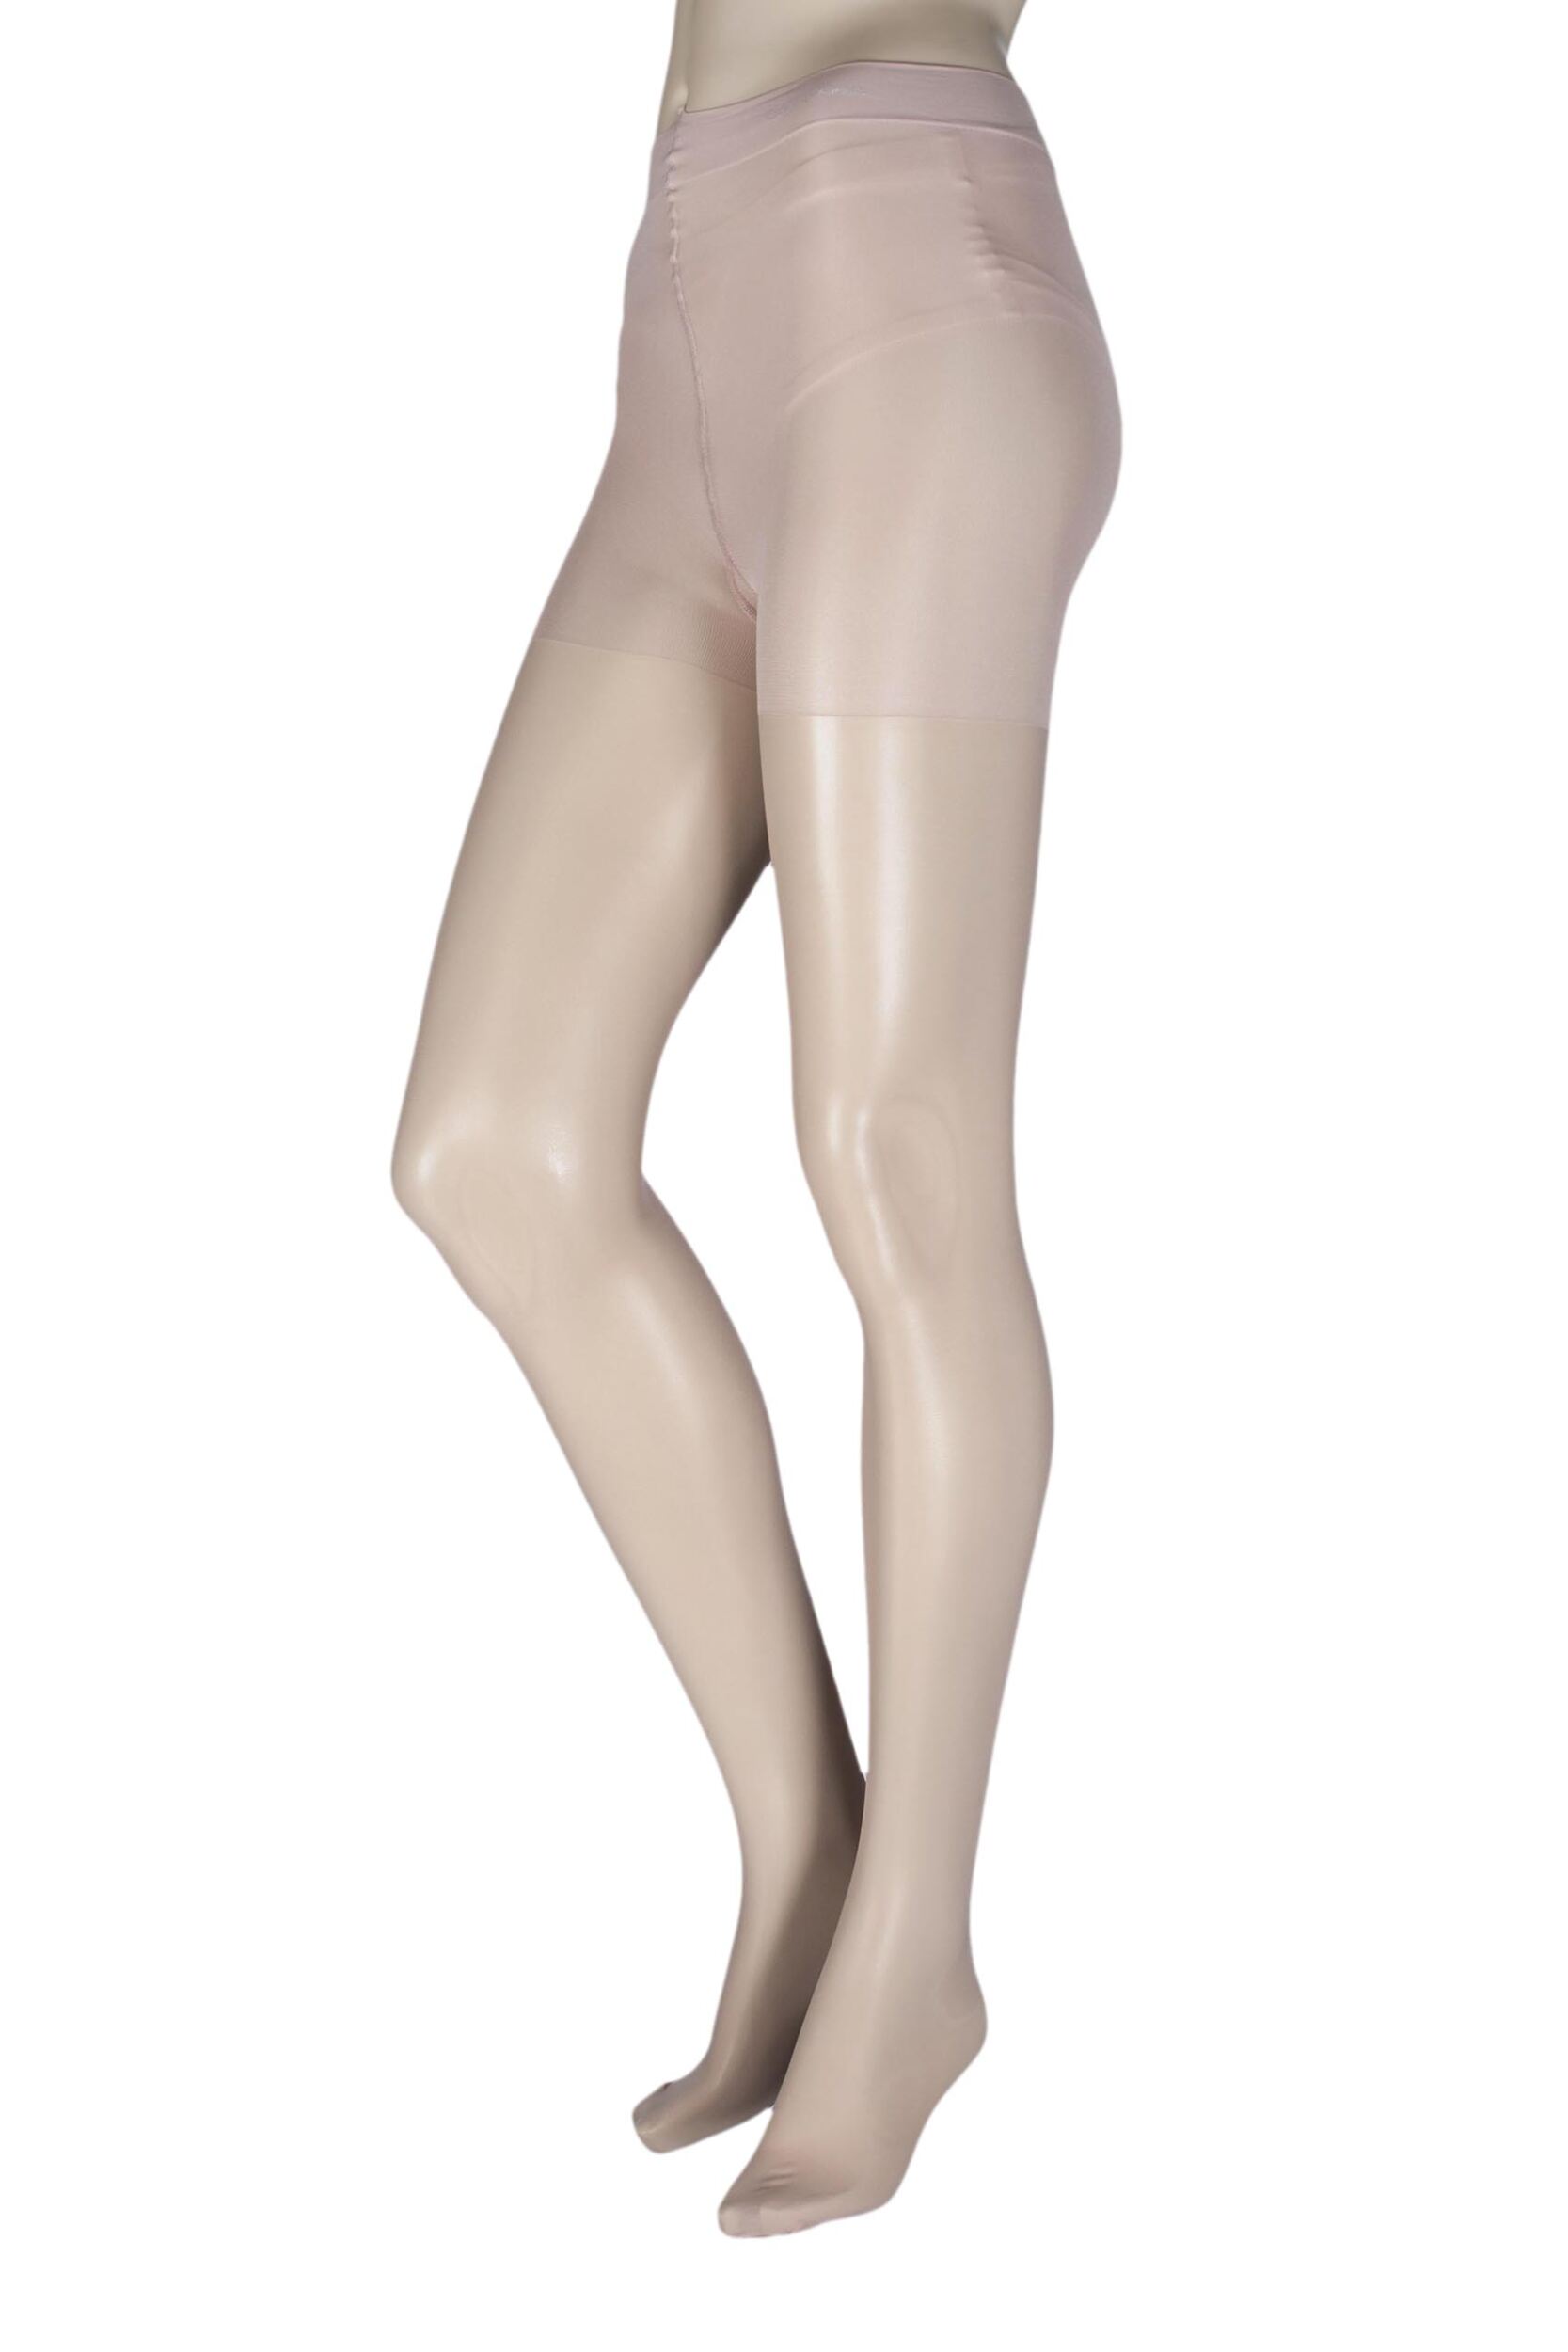 Image of Ladies 1 Pair Calvin Klein Sheer Essentials Active Tights with Control Top